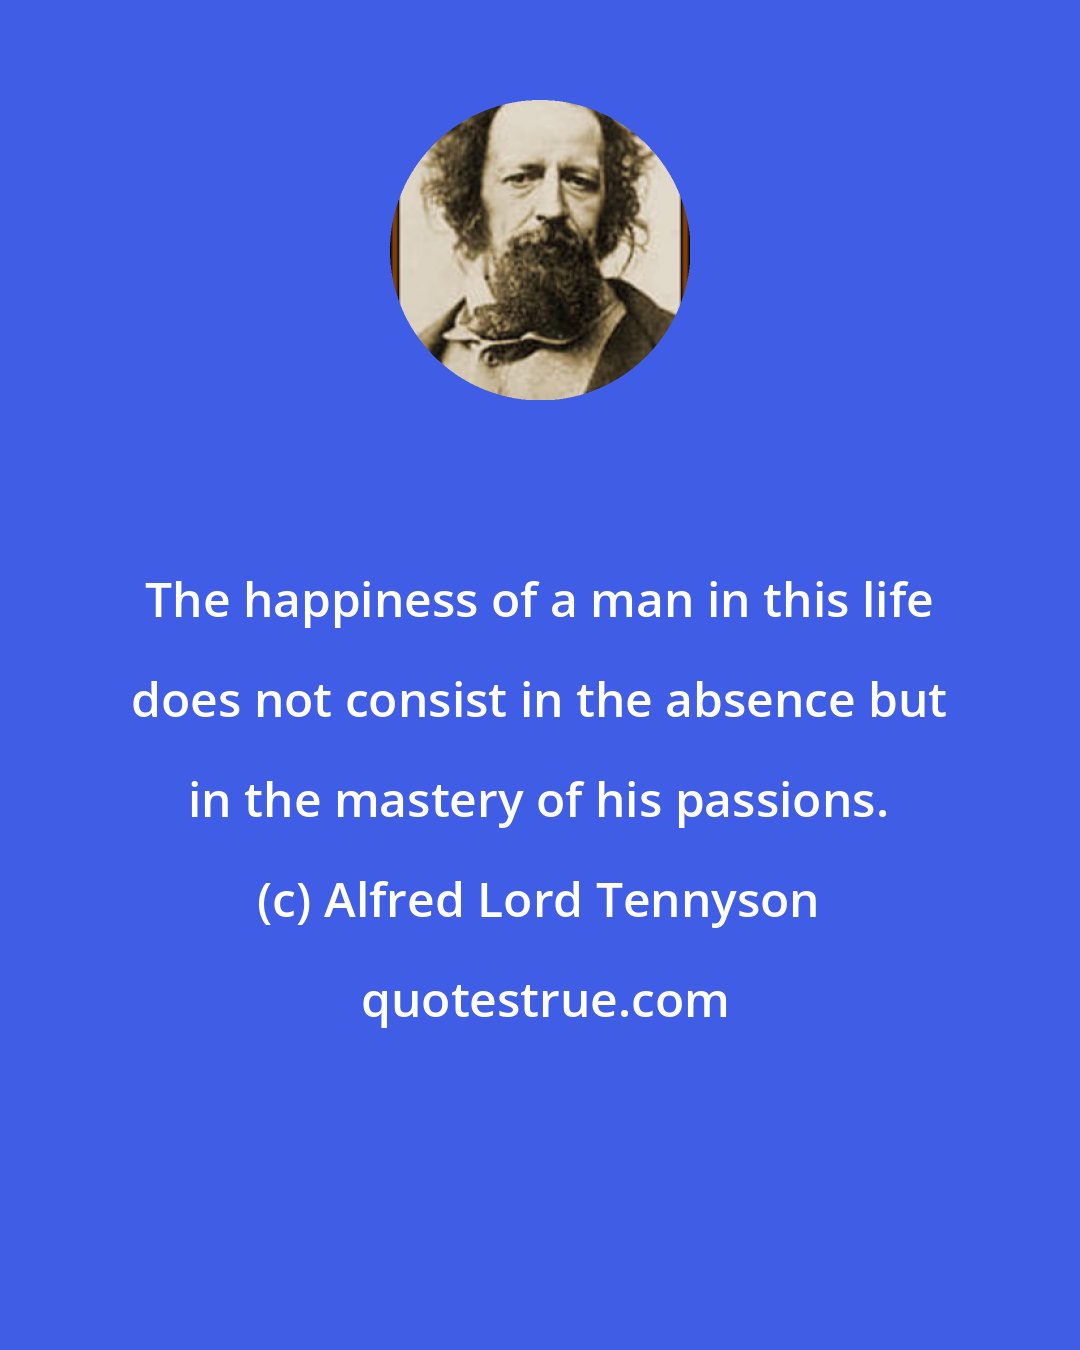 Alfred Lord Tennyson: The happiness of a man in this life does not consist in the absence but in the mastery of his passions.